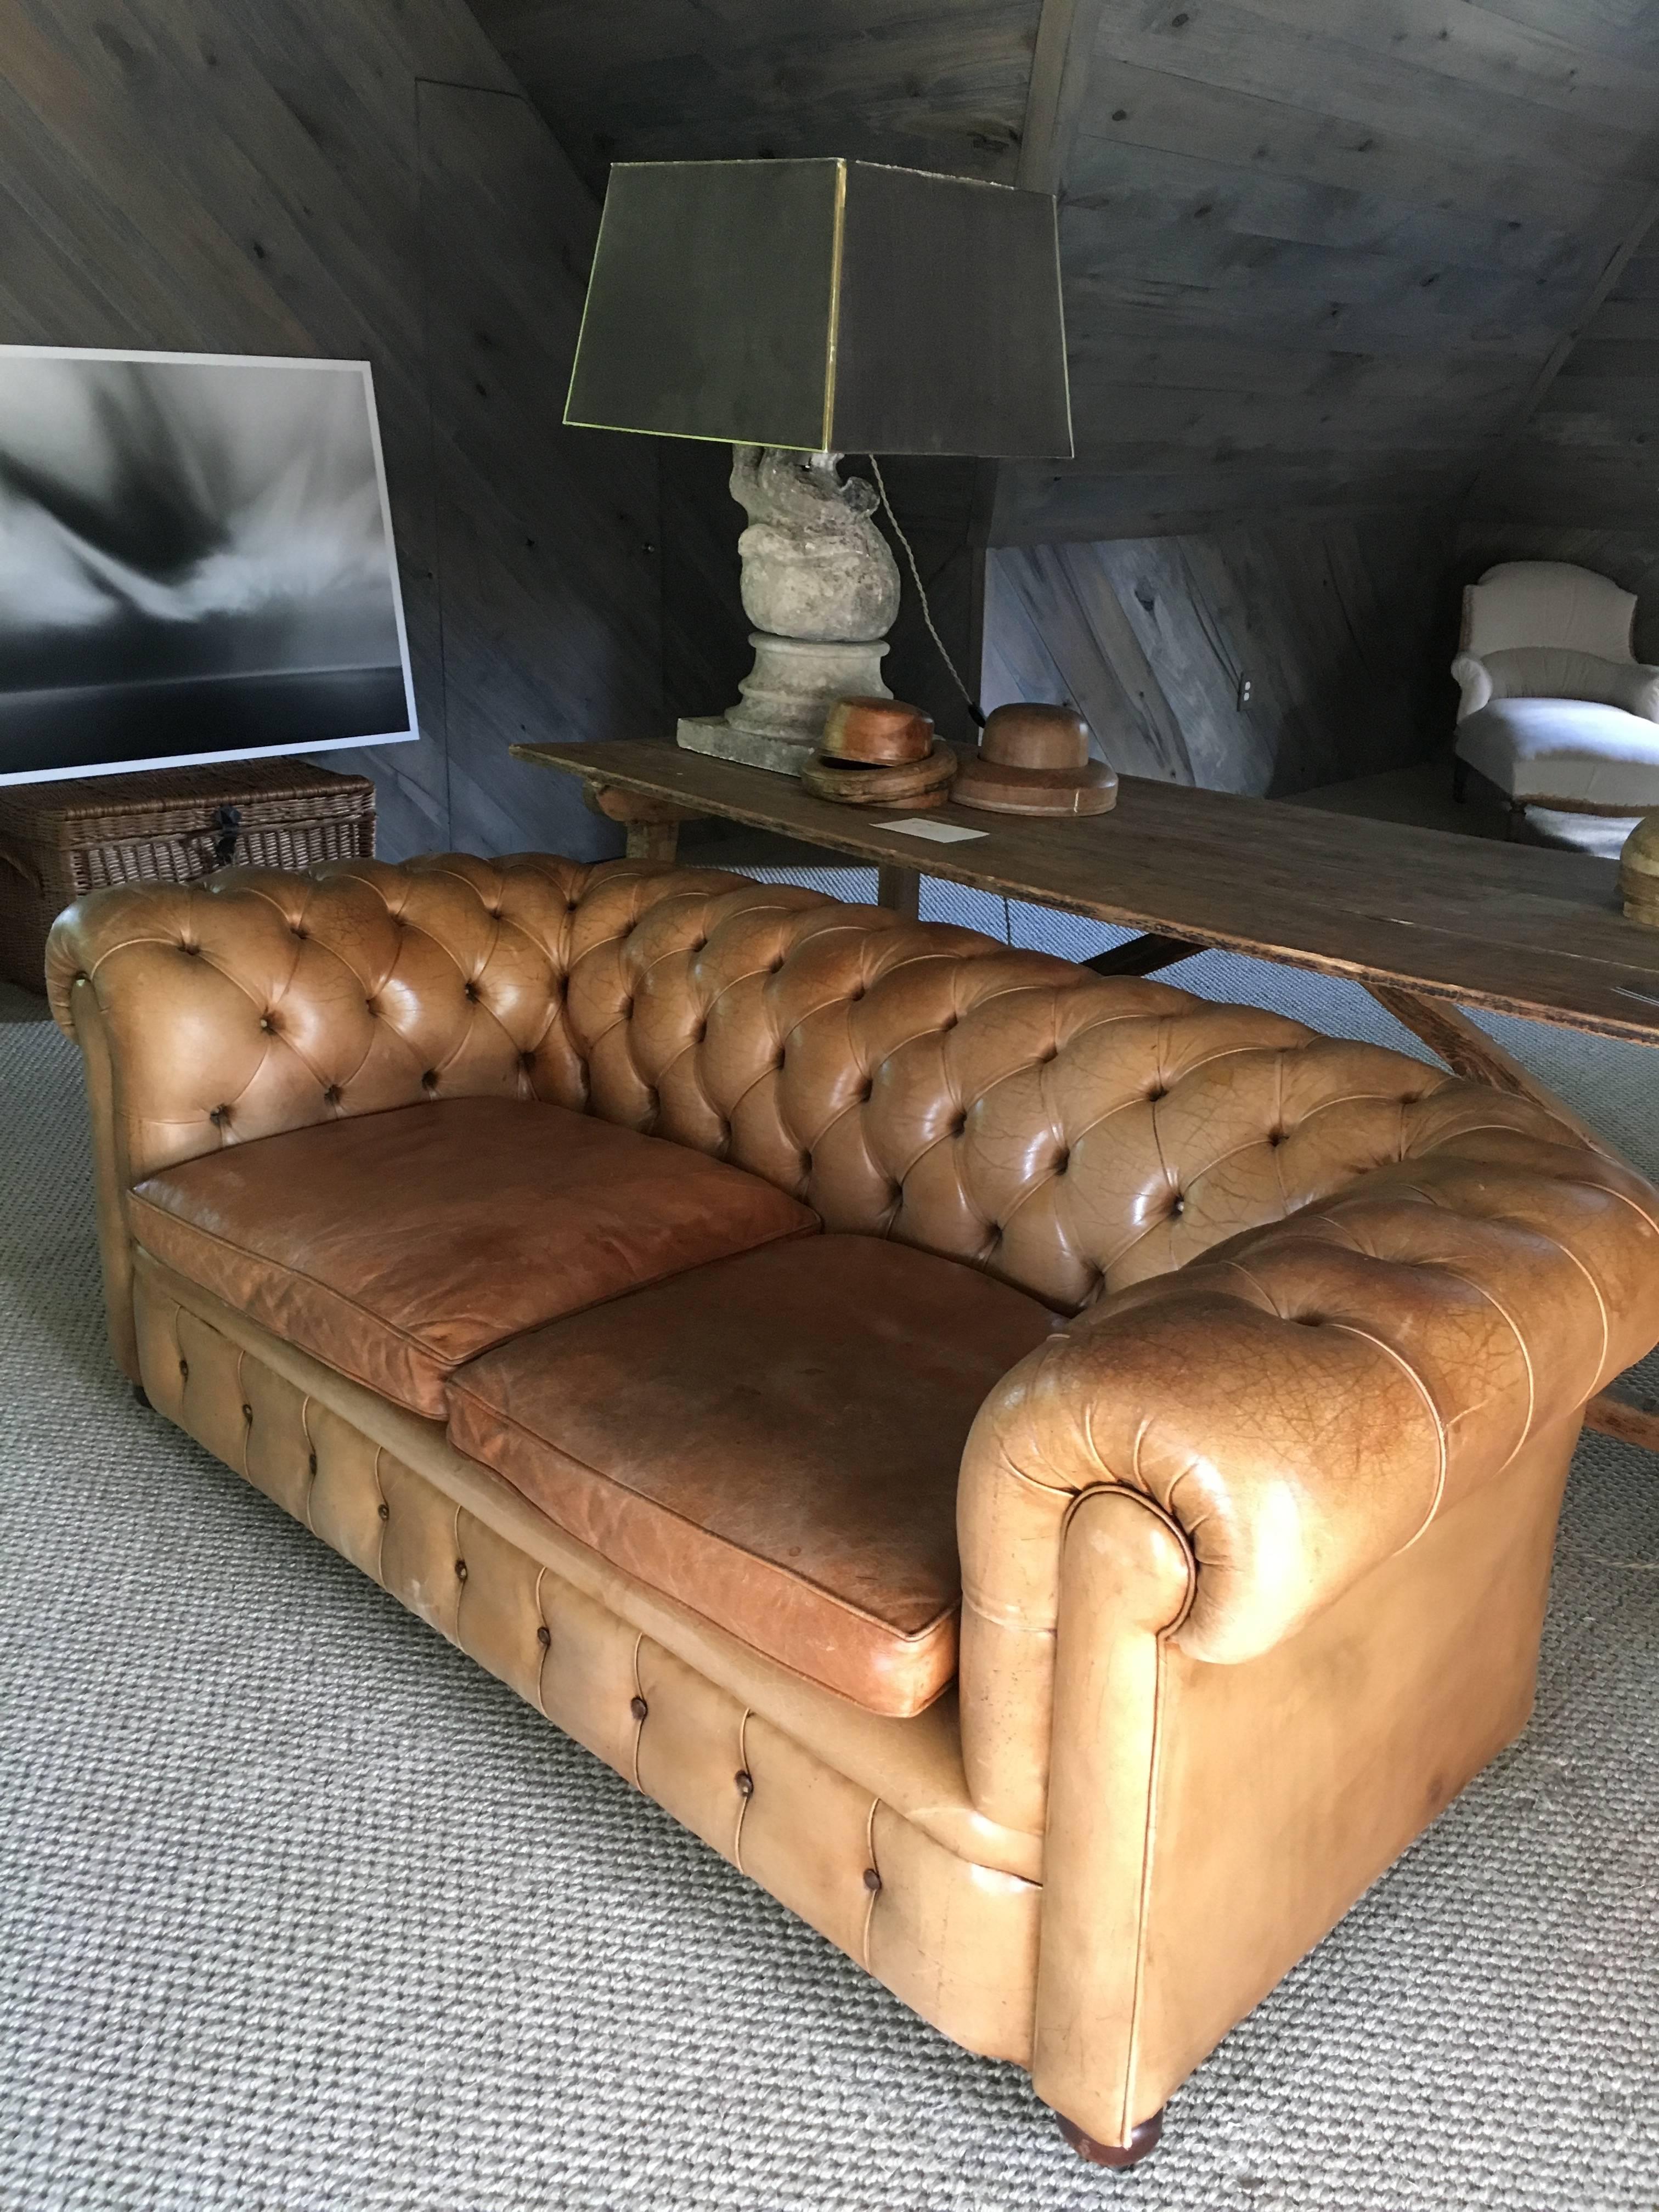 French leather Chesterfield sofa, circa 1900. The tufted design is attributed to an 18th century Earl of Chesterfield, who wished to provide comfortable seating to guests that would not wrinkle their clothes. Amazing sun faded patina on the caramel